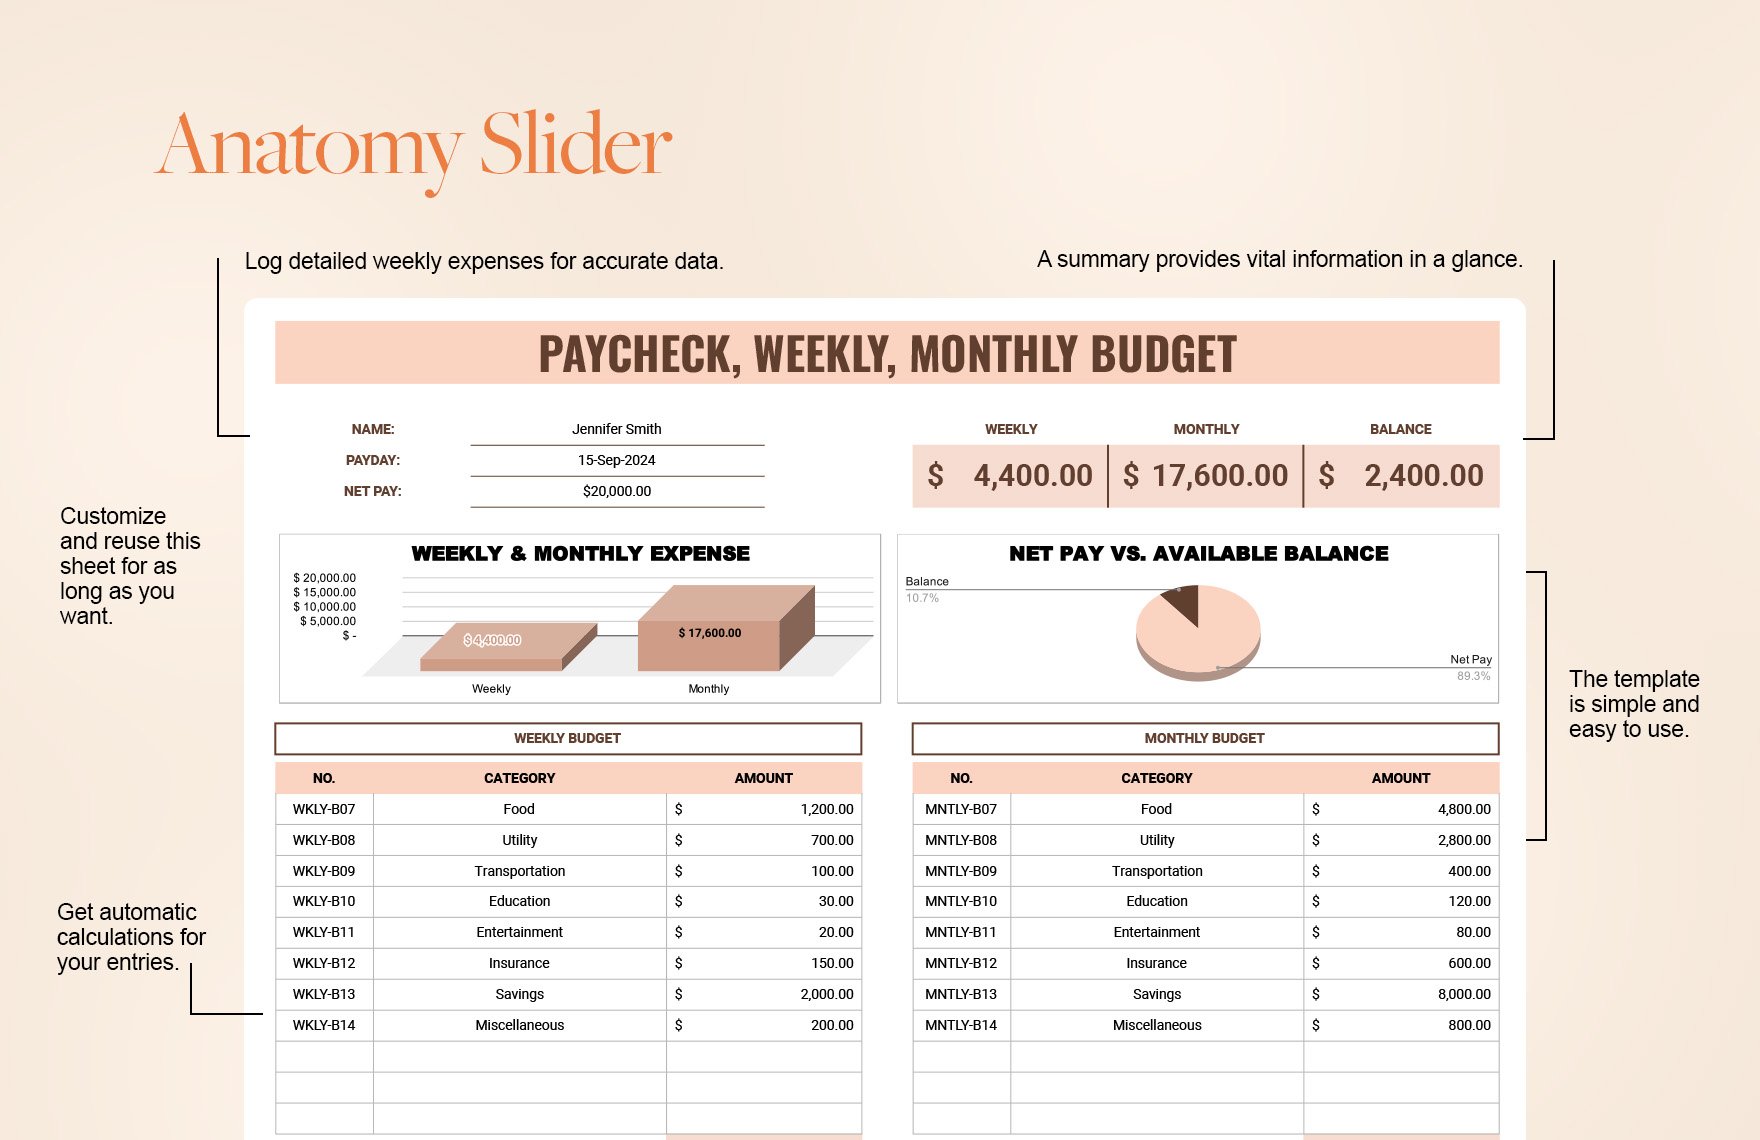 PayCheck, Weekly, Monthly Budget Template